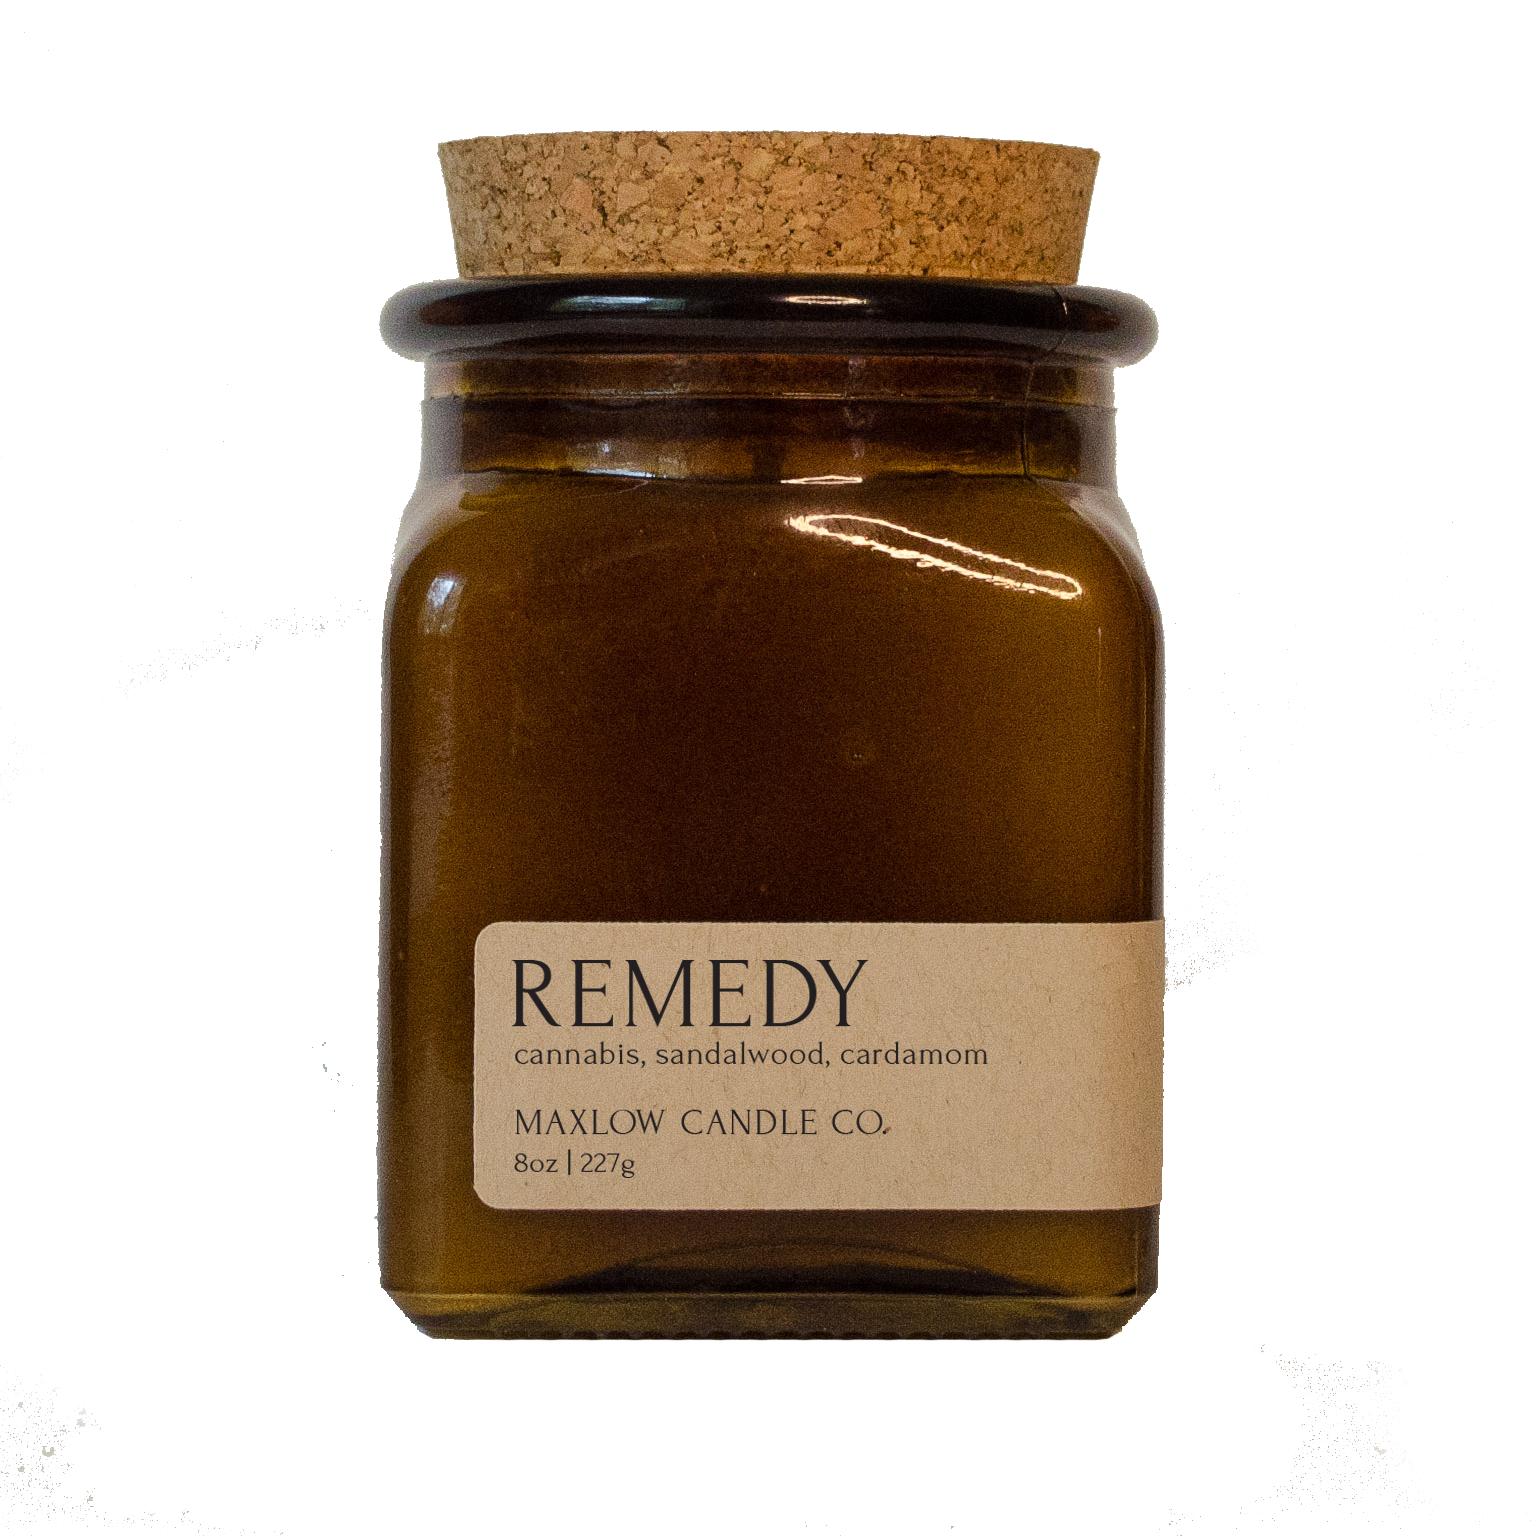 Remedy - 8oz Soy Candle - LAST CHANCE